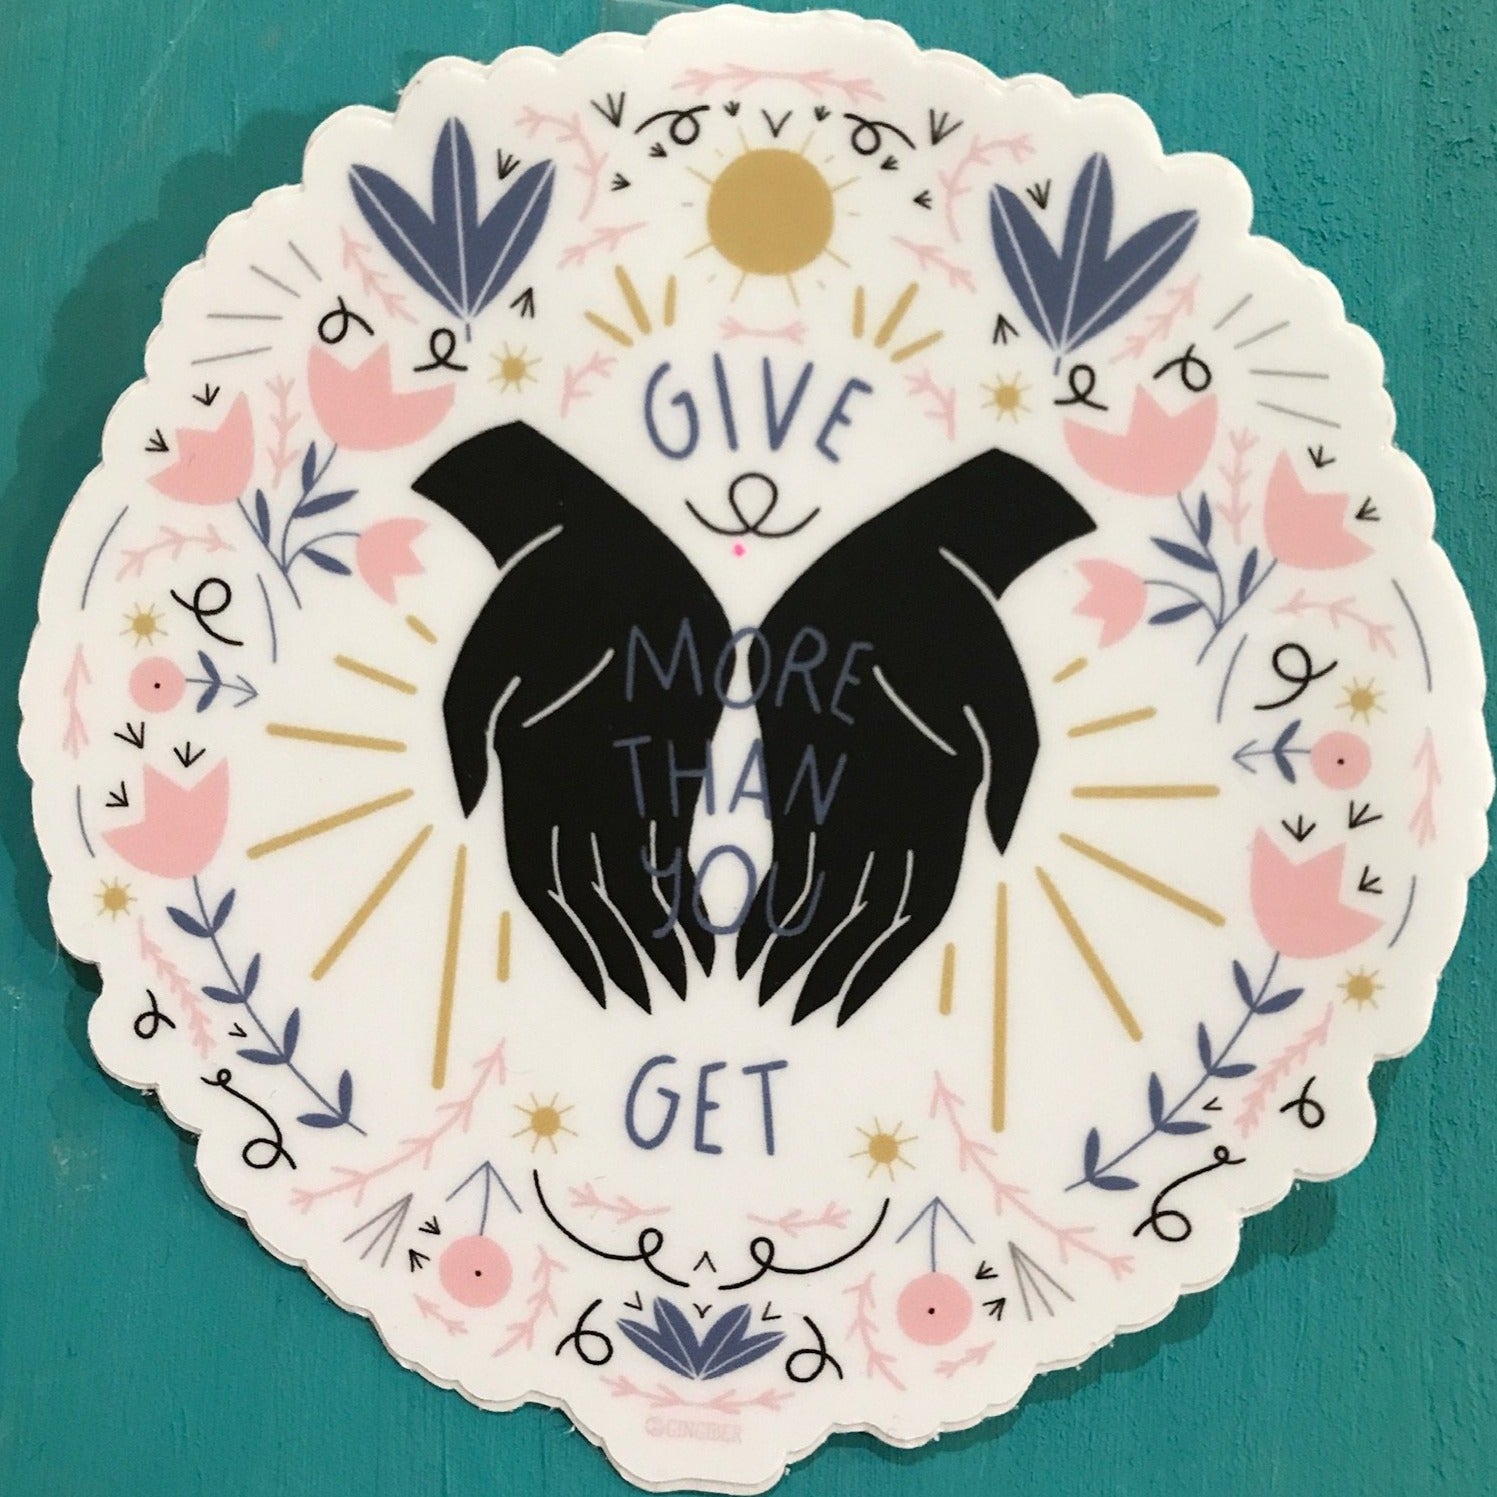 Sticker - Give More Than You Get